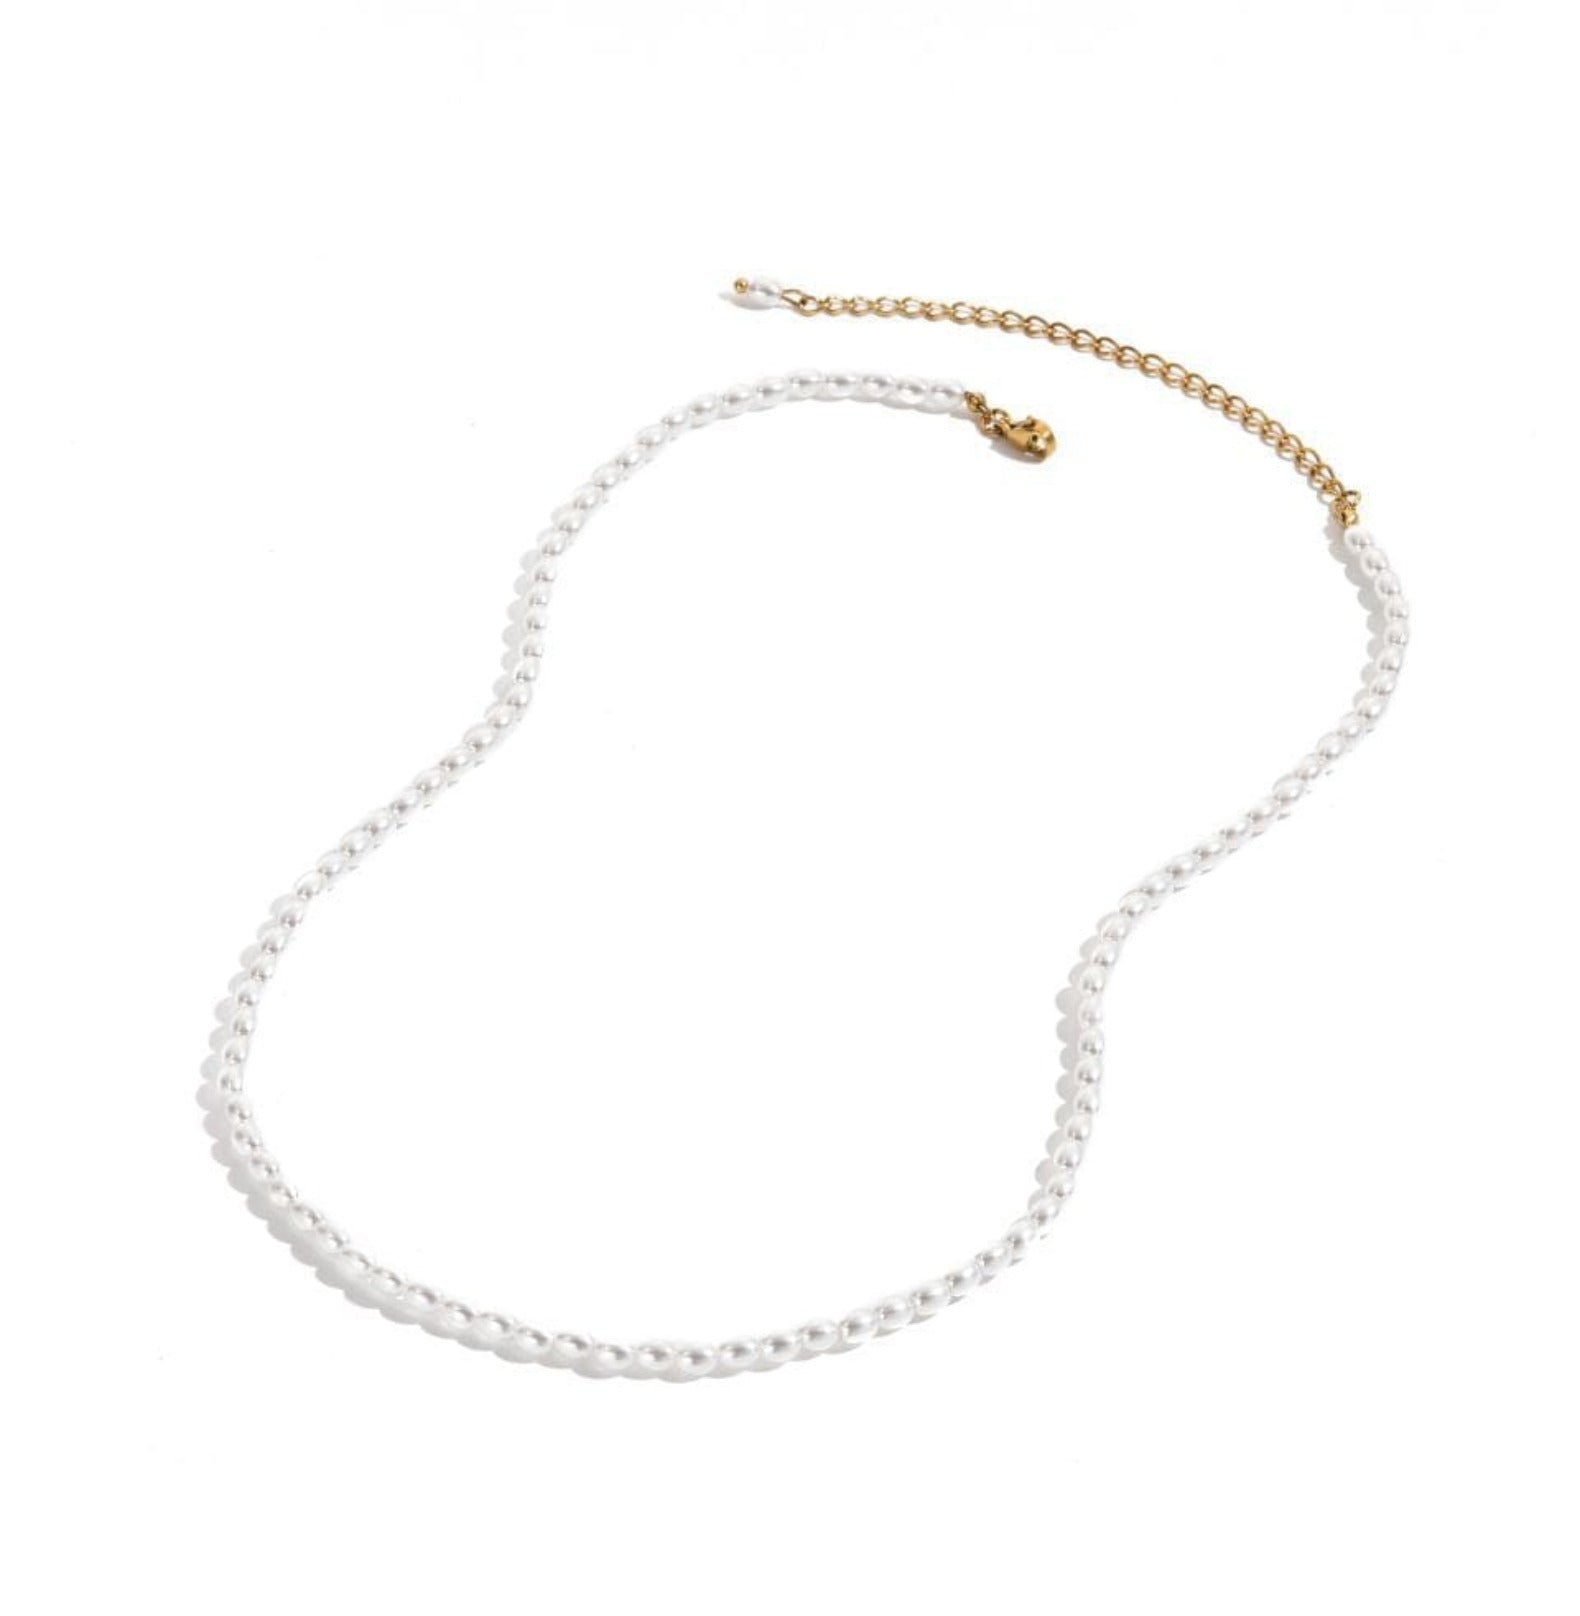 FRESHWATER PEARL CHAIN braclet Yubama Jewelry Online Store - The Elegant Designs of Gold and Silver ! 